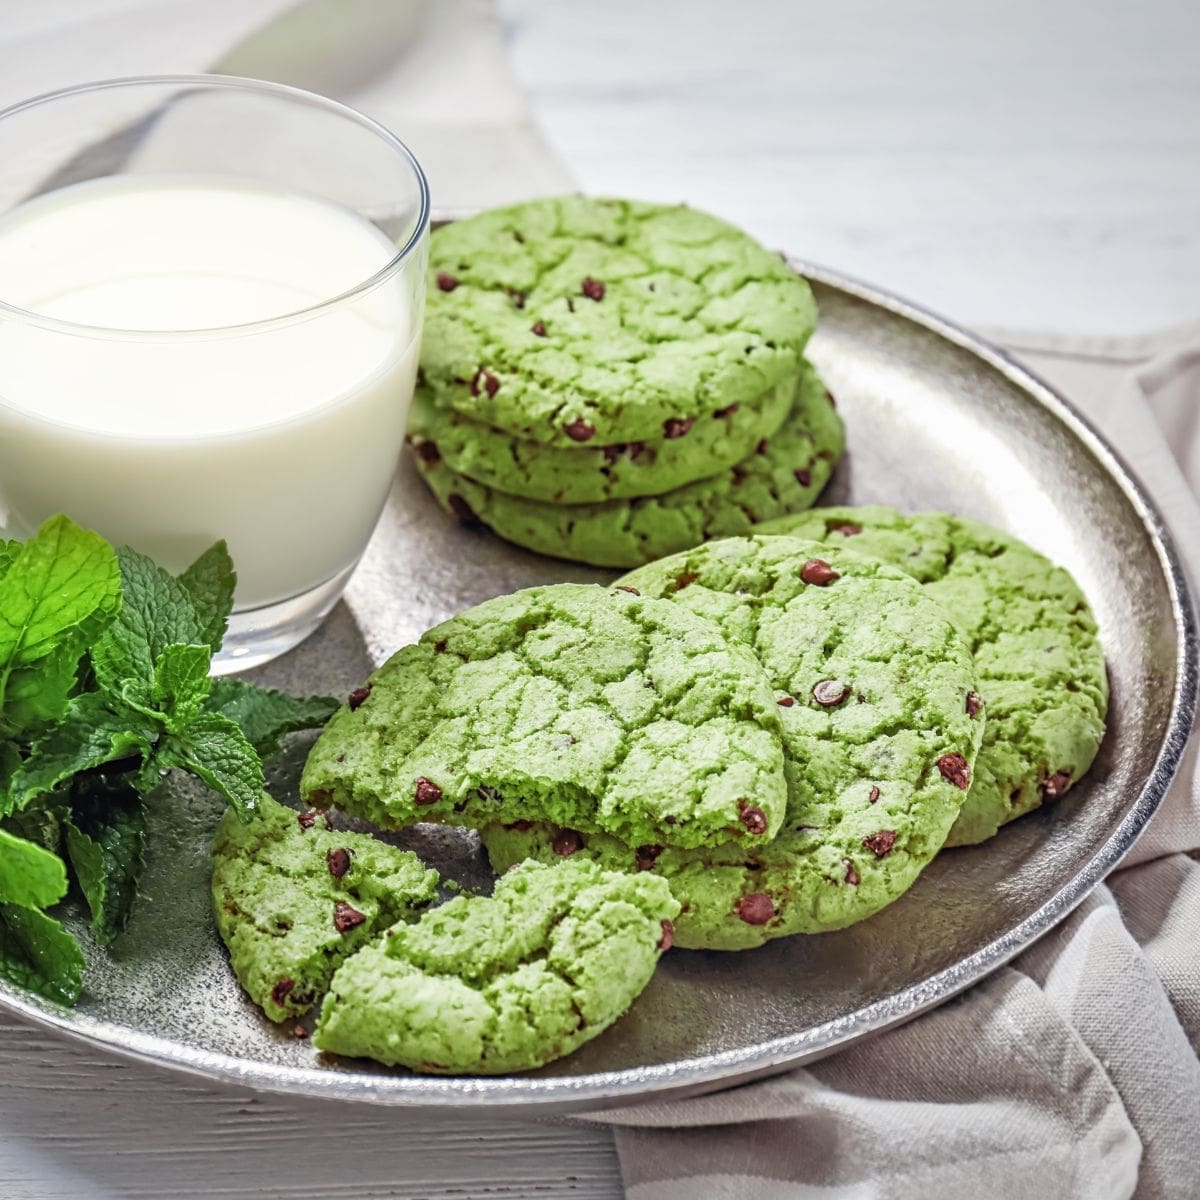 15 Best Recipes Using Mint Extract